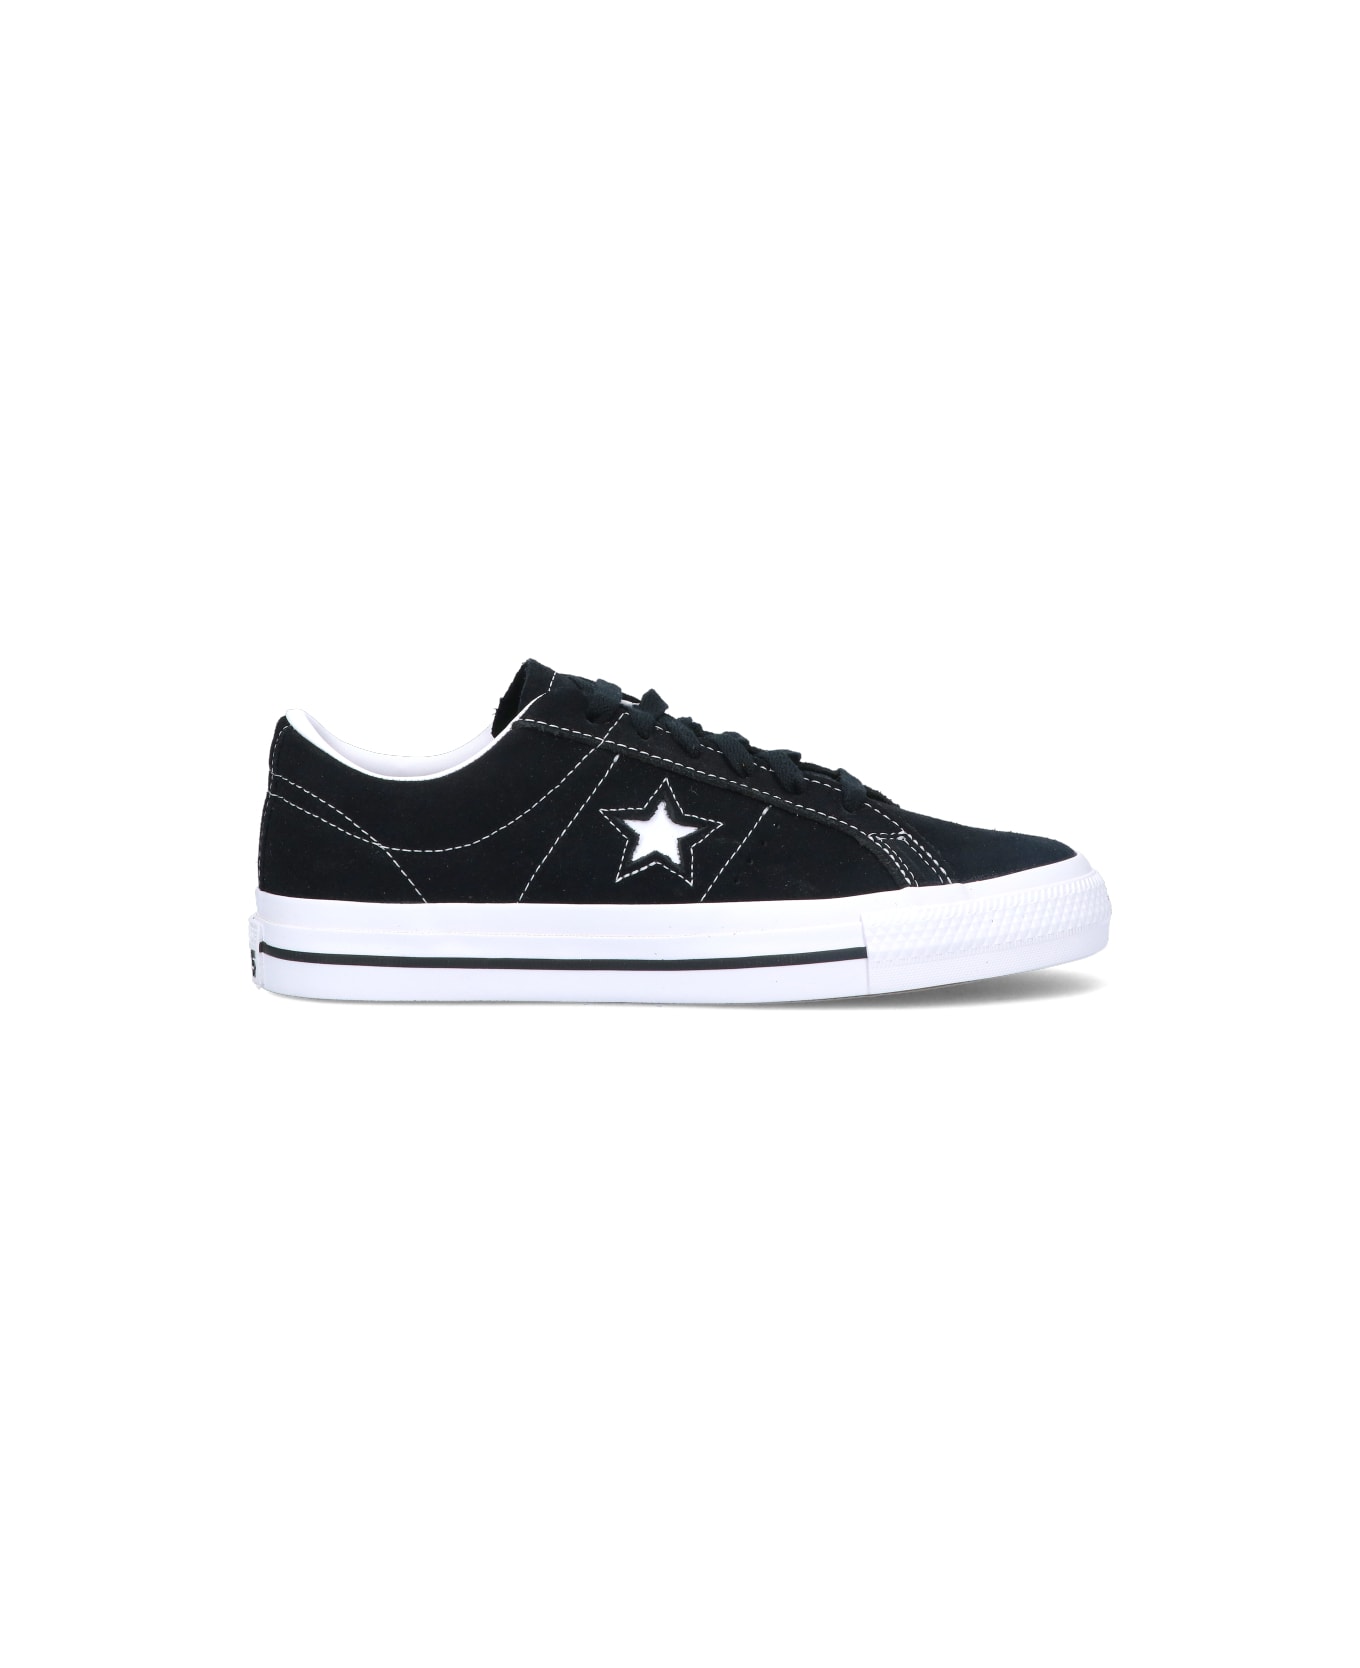 Converse 'cons One Star Pro' Suede Sneakers - Black  